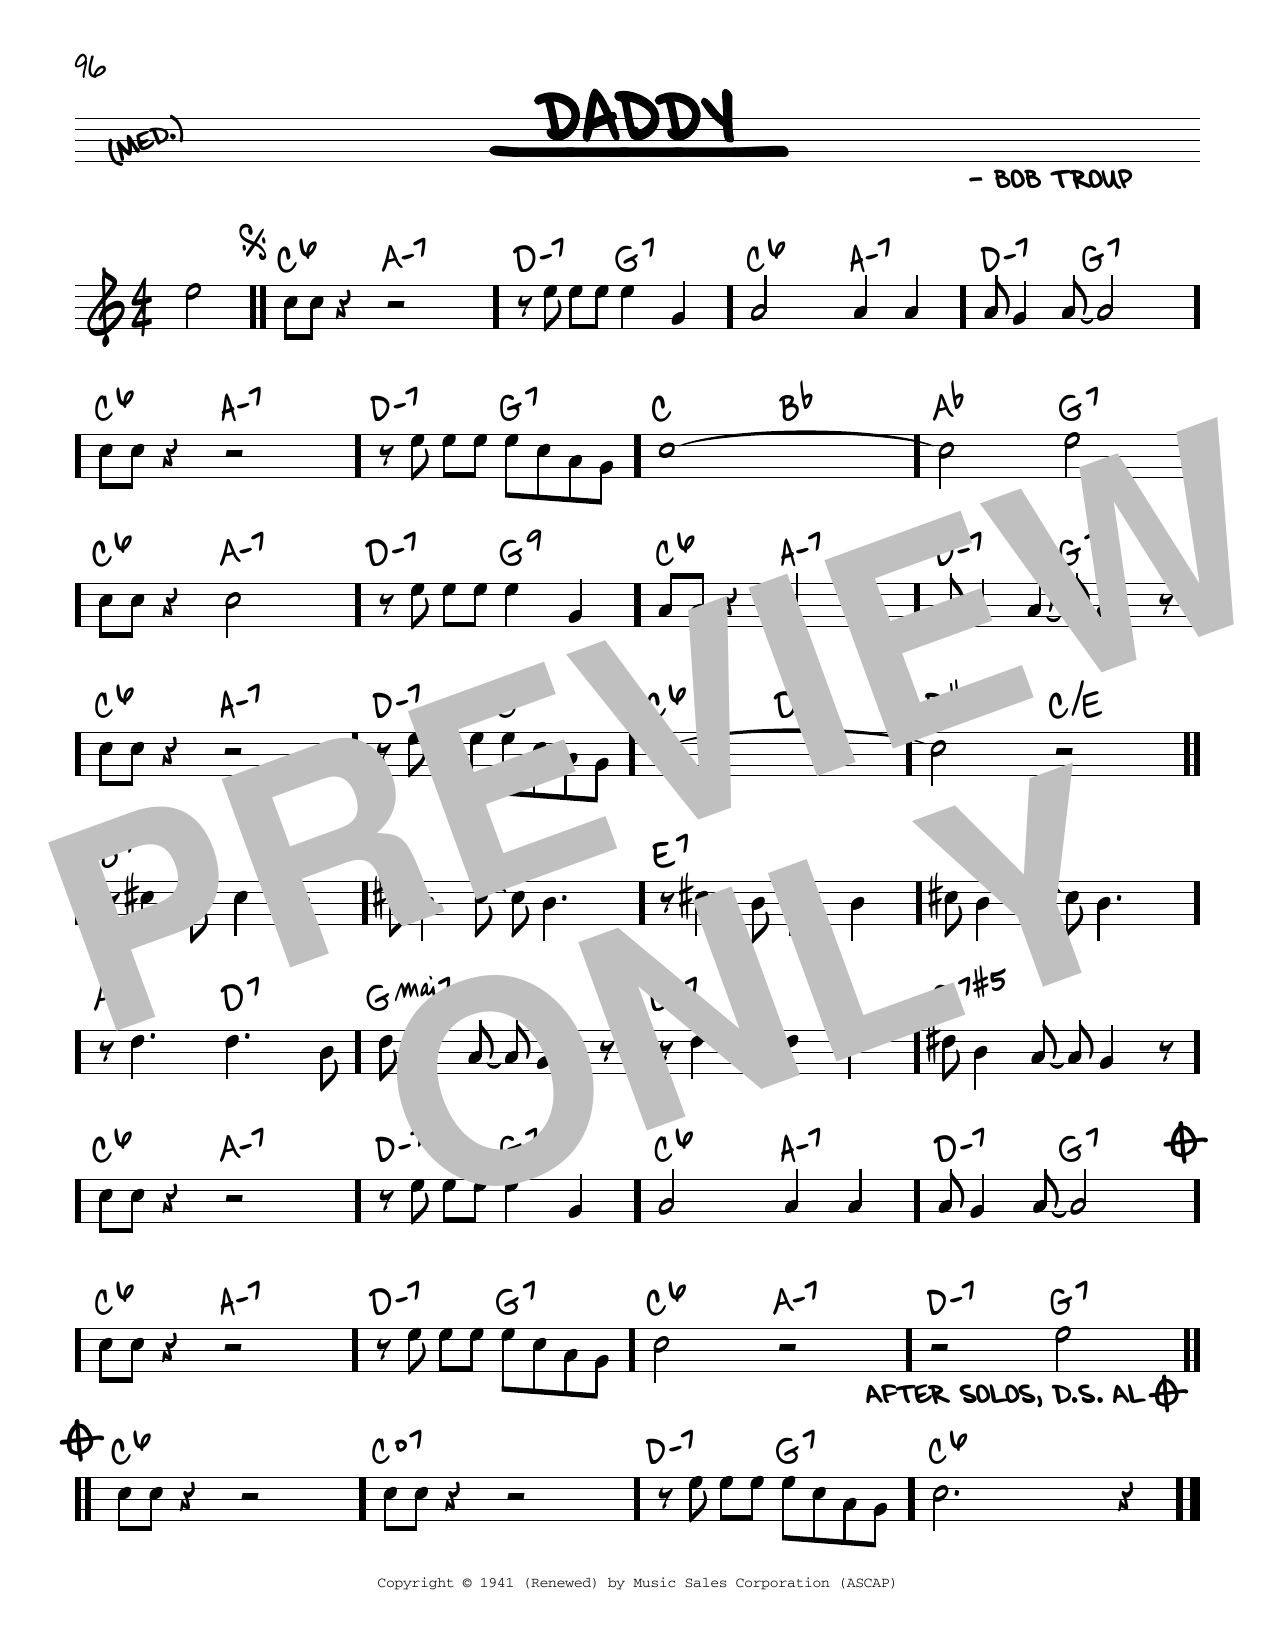 Download Bobby Troup Daddy Sheet Music